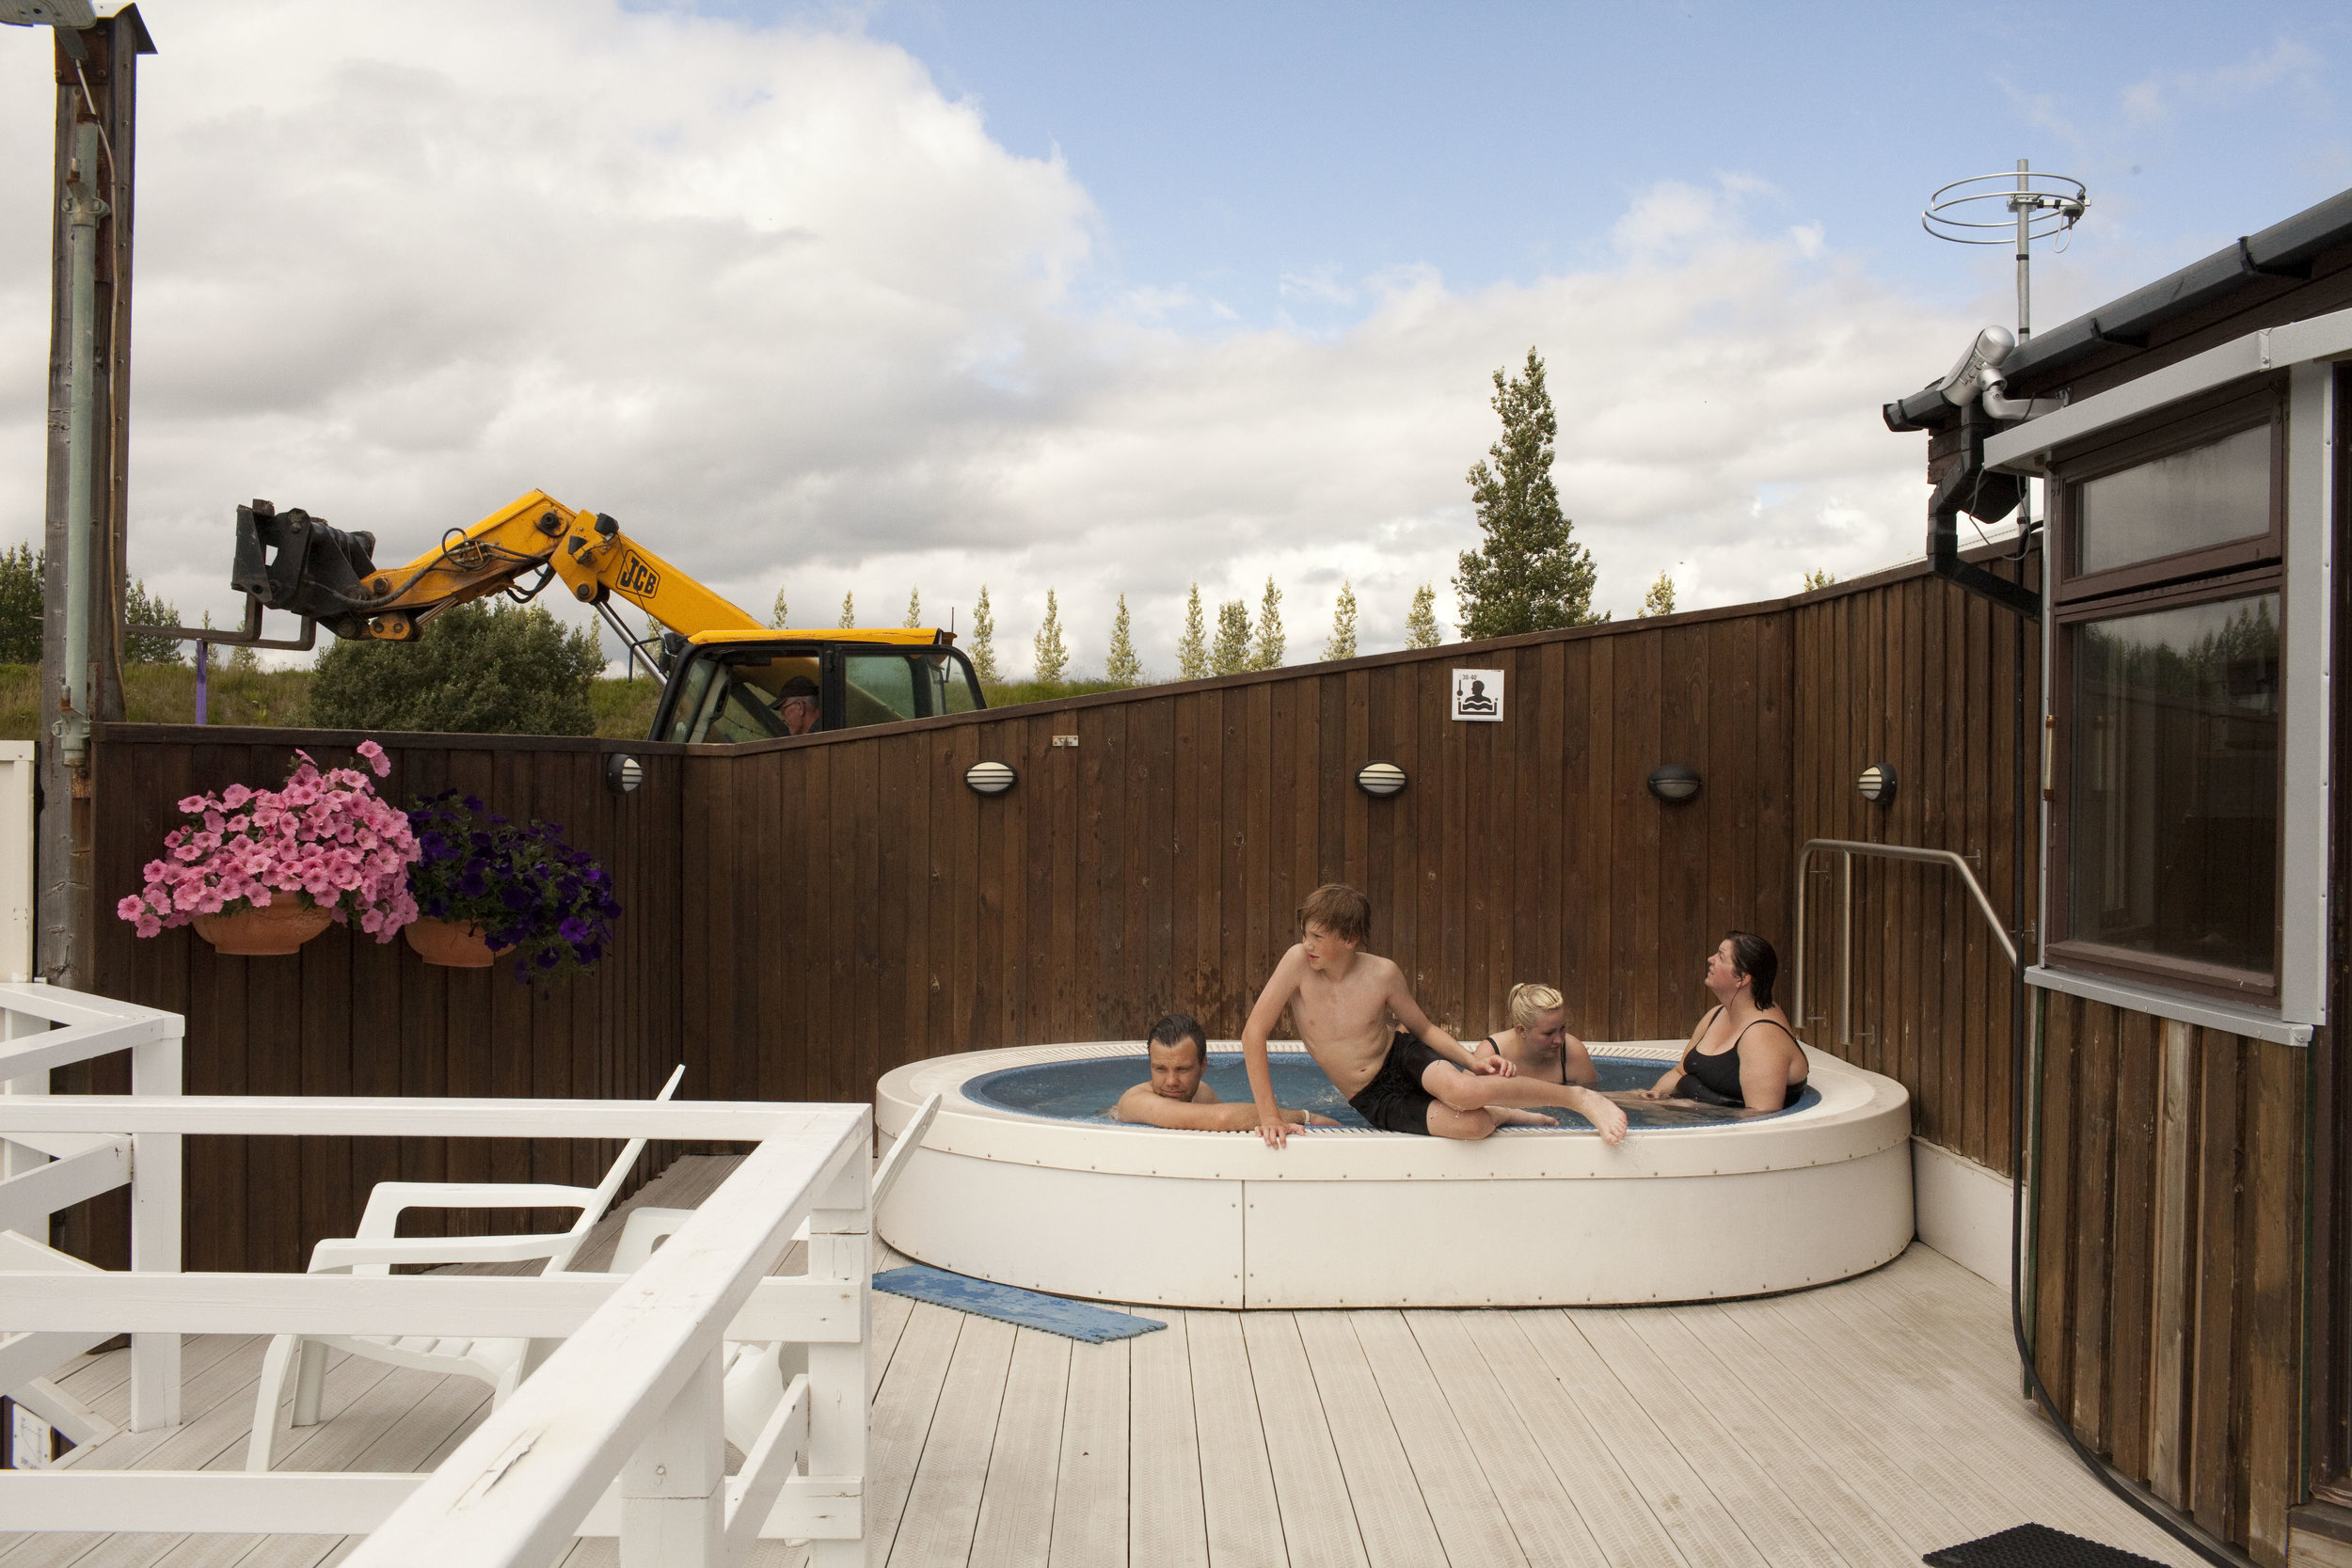  A family soaks in the hot tub at a pool in Fludir, a small Icelandic town of around 400 people. 